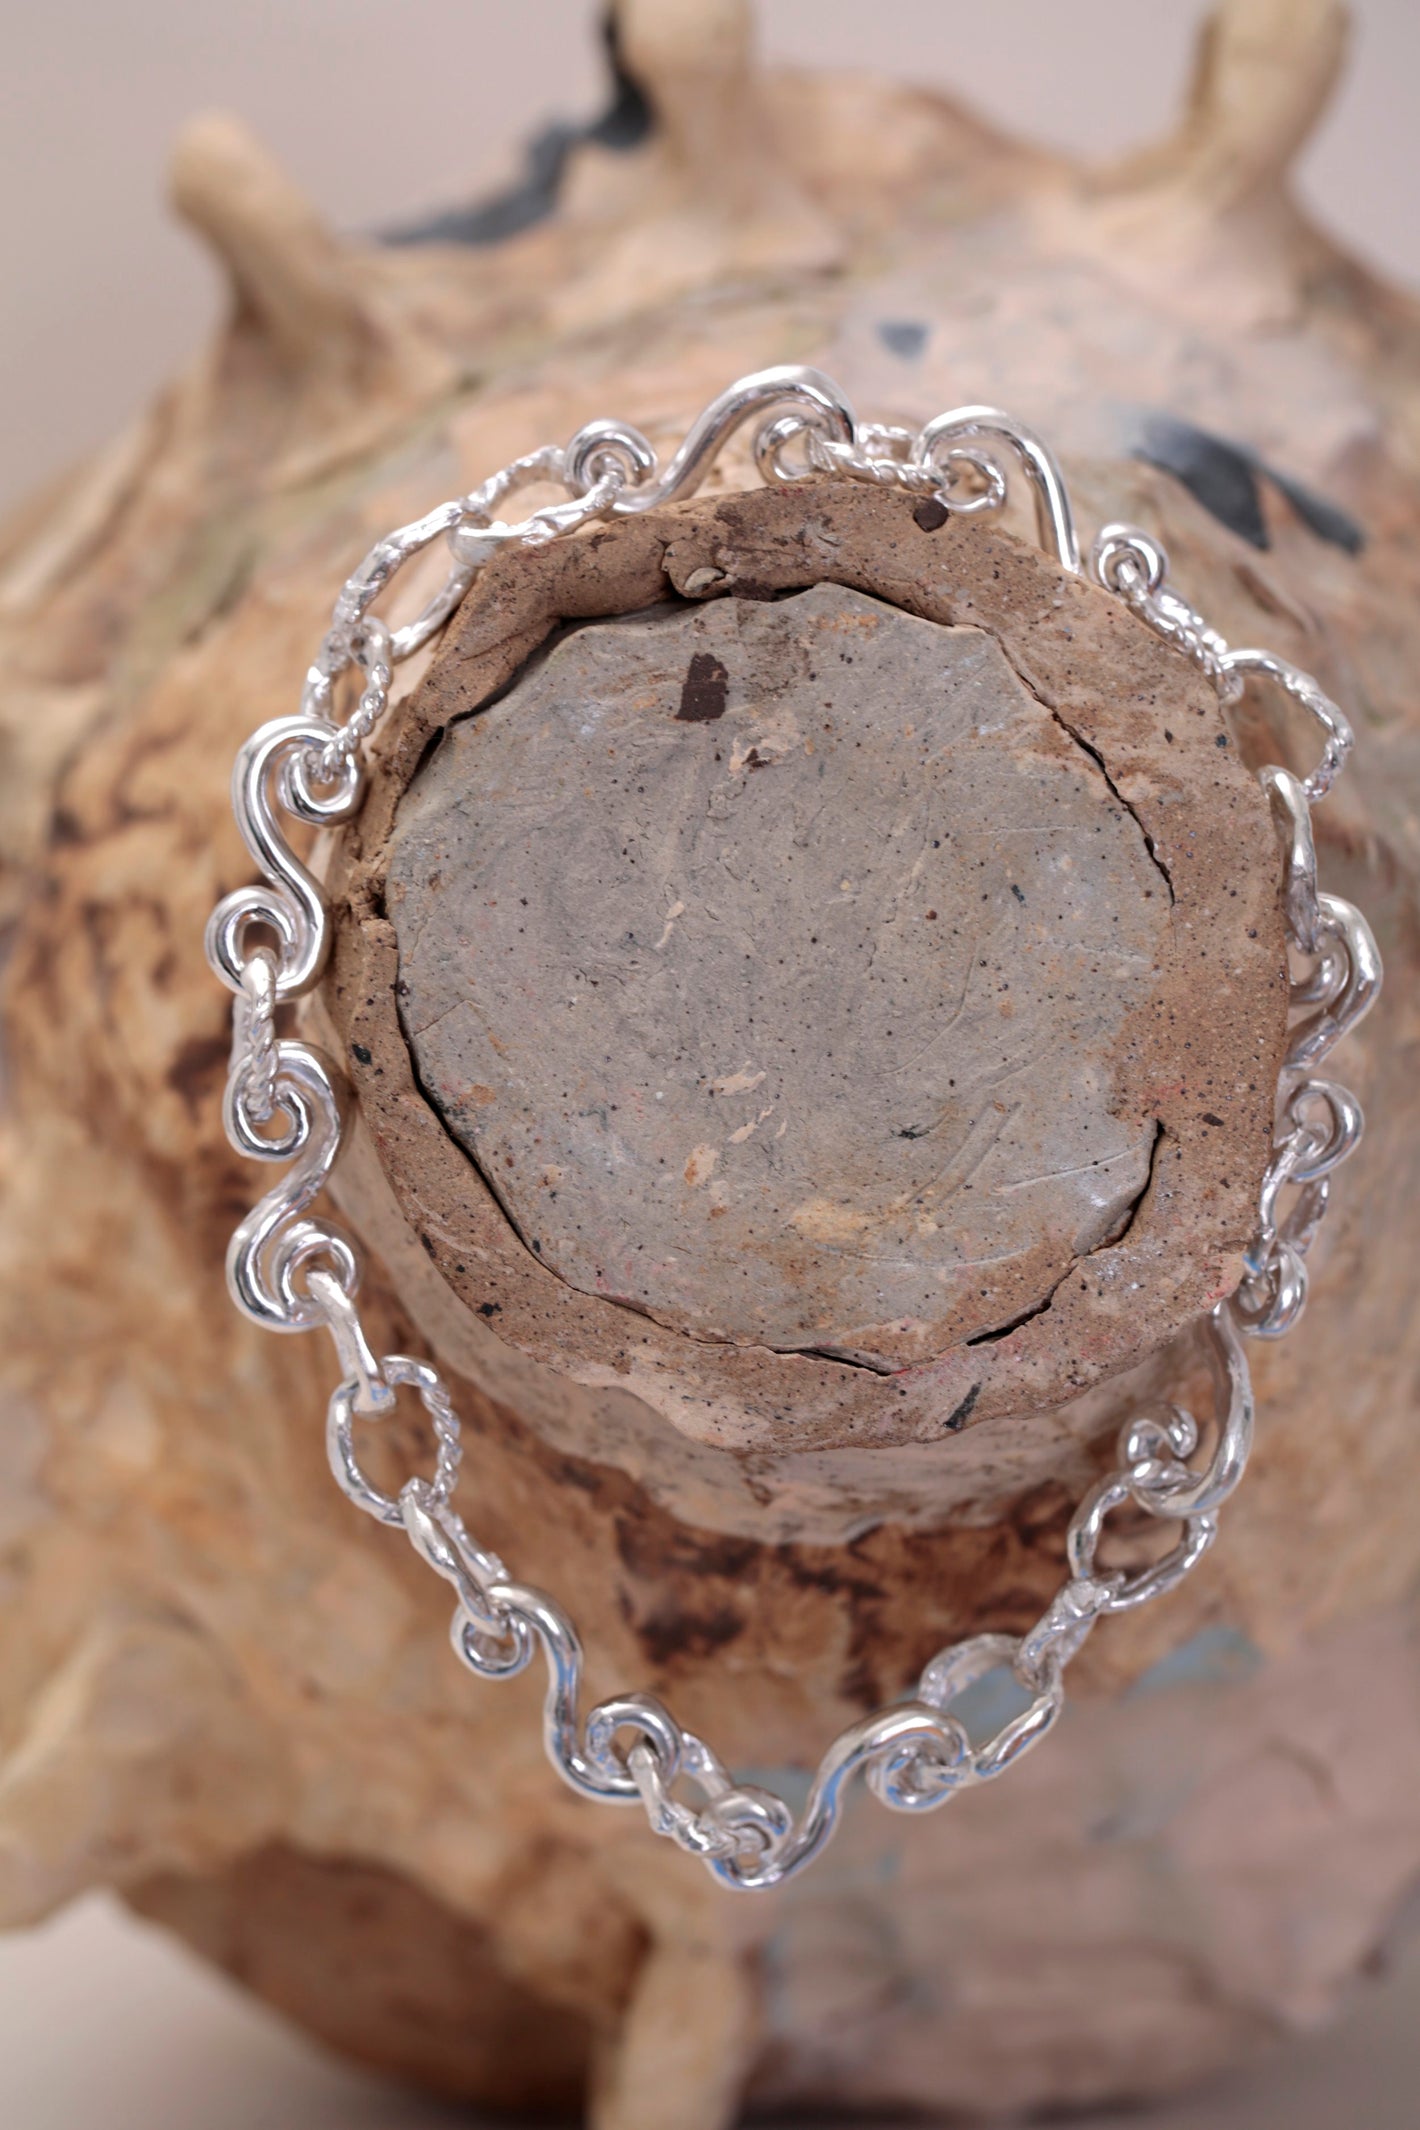 Braided Waves Necklace by CLARK. One-of-a-kind Sterling Silver necklace hanging on a ceramic pot. Spiral links and sea-formed rings joined in a long chain necklace and finished in a high polish.